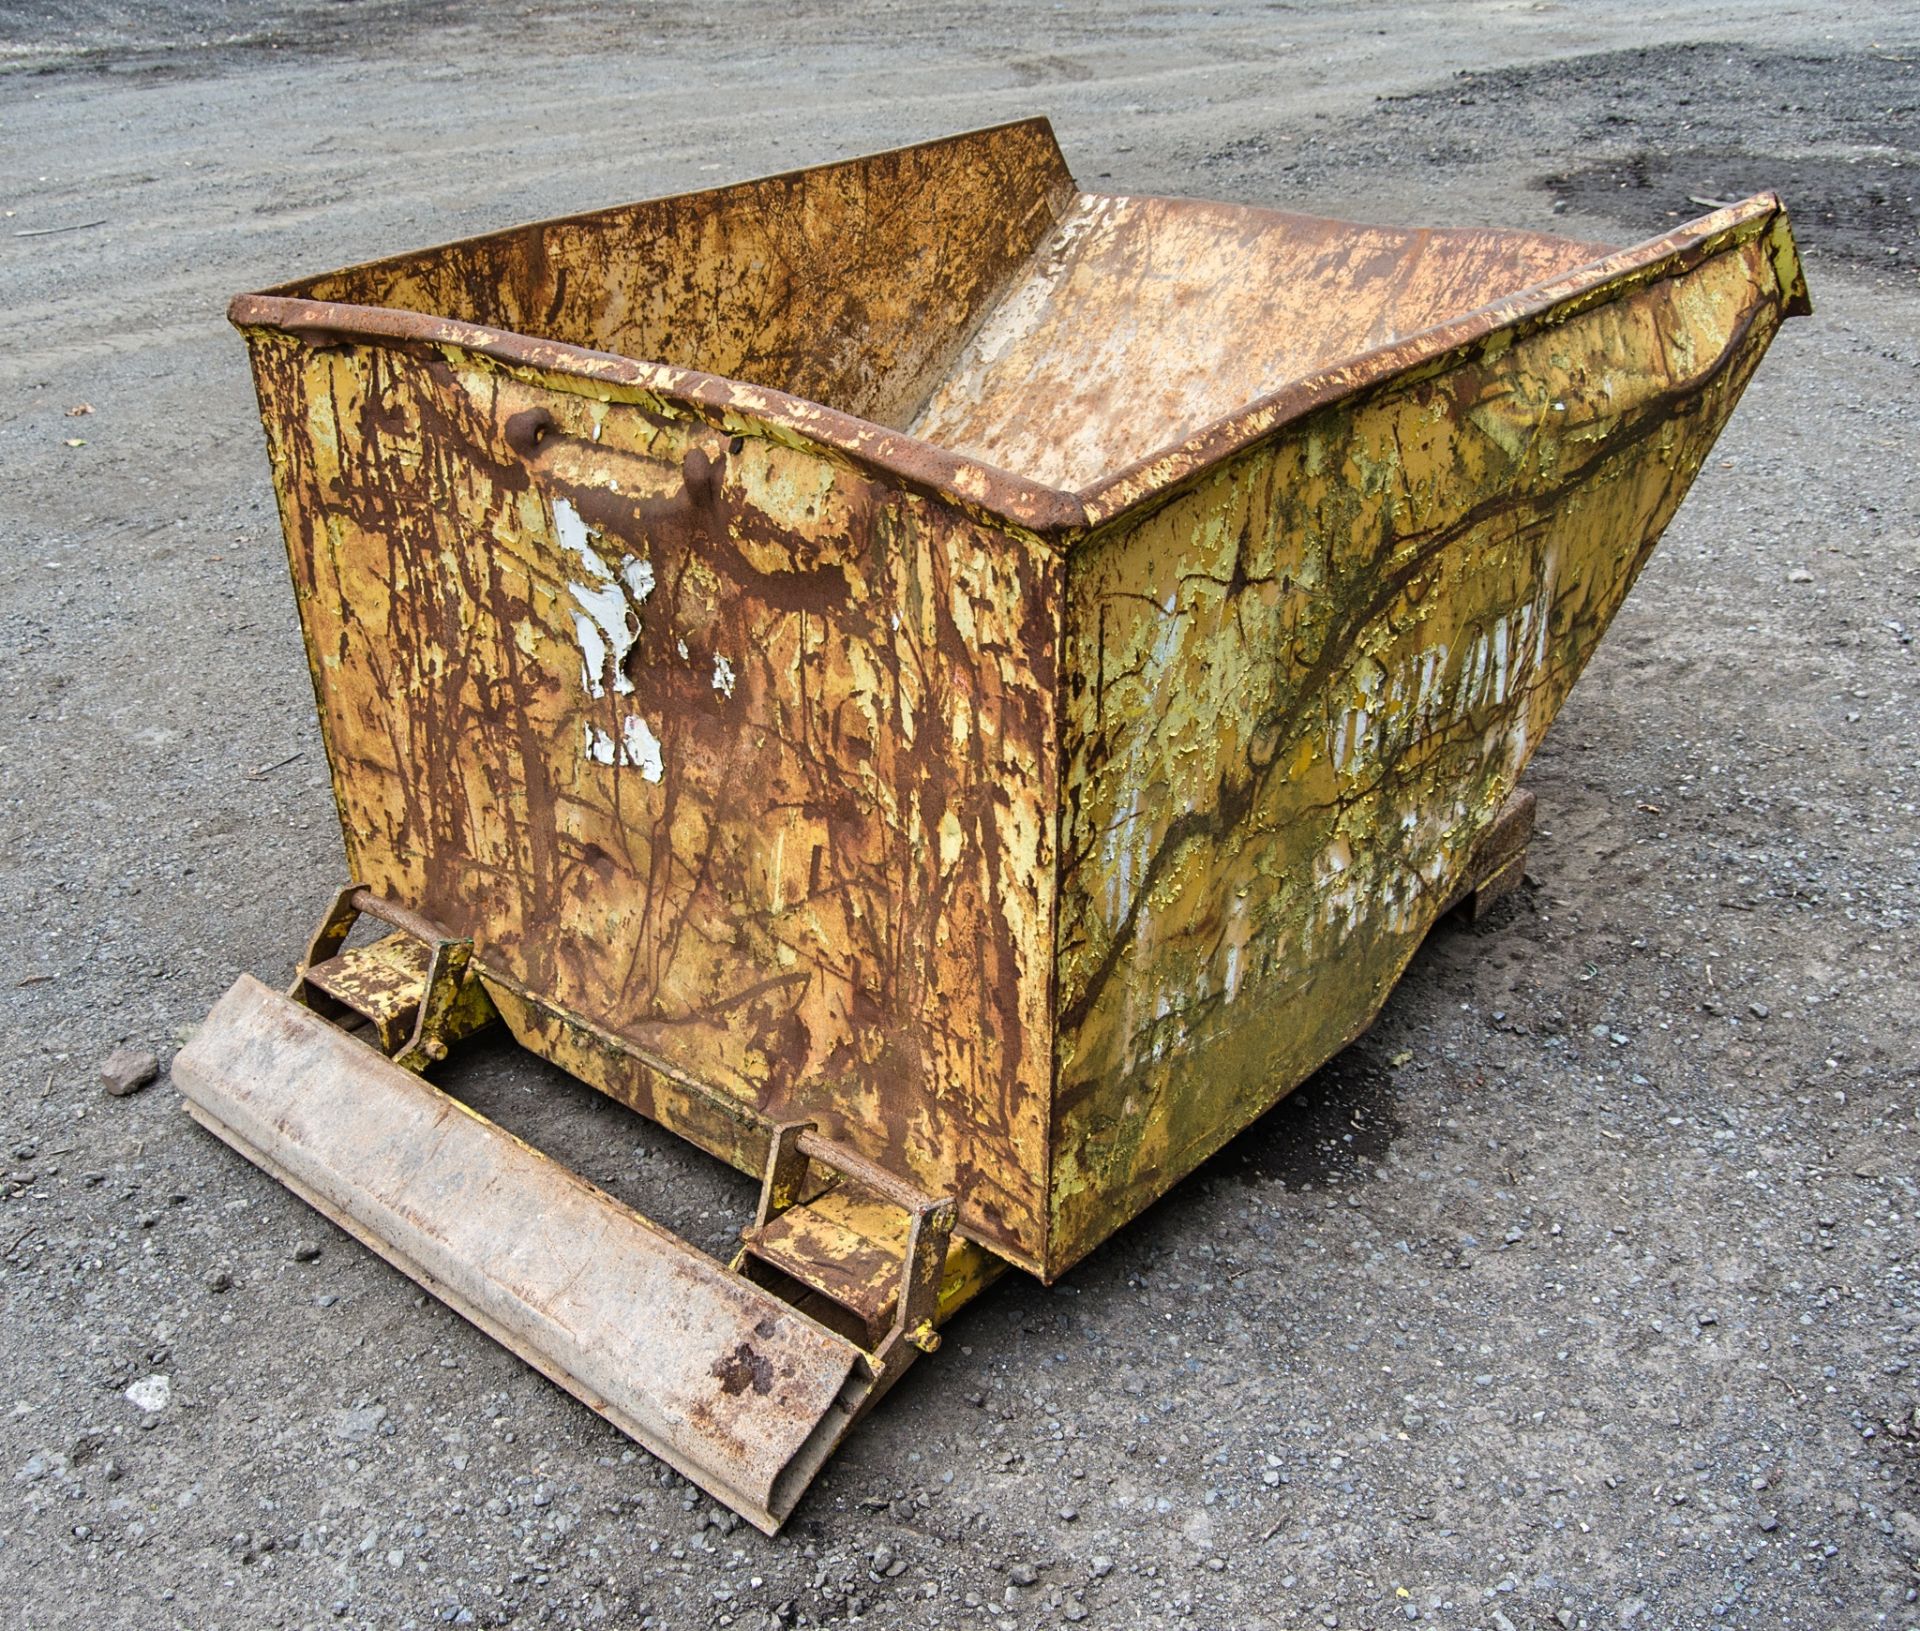 Steel tipping skip - Image 2 of 2